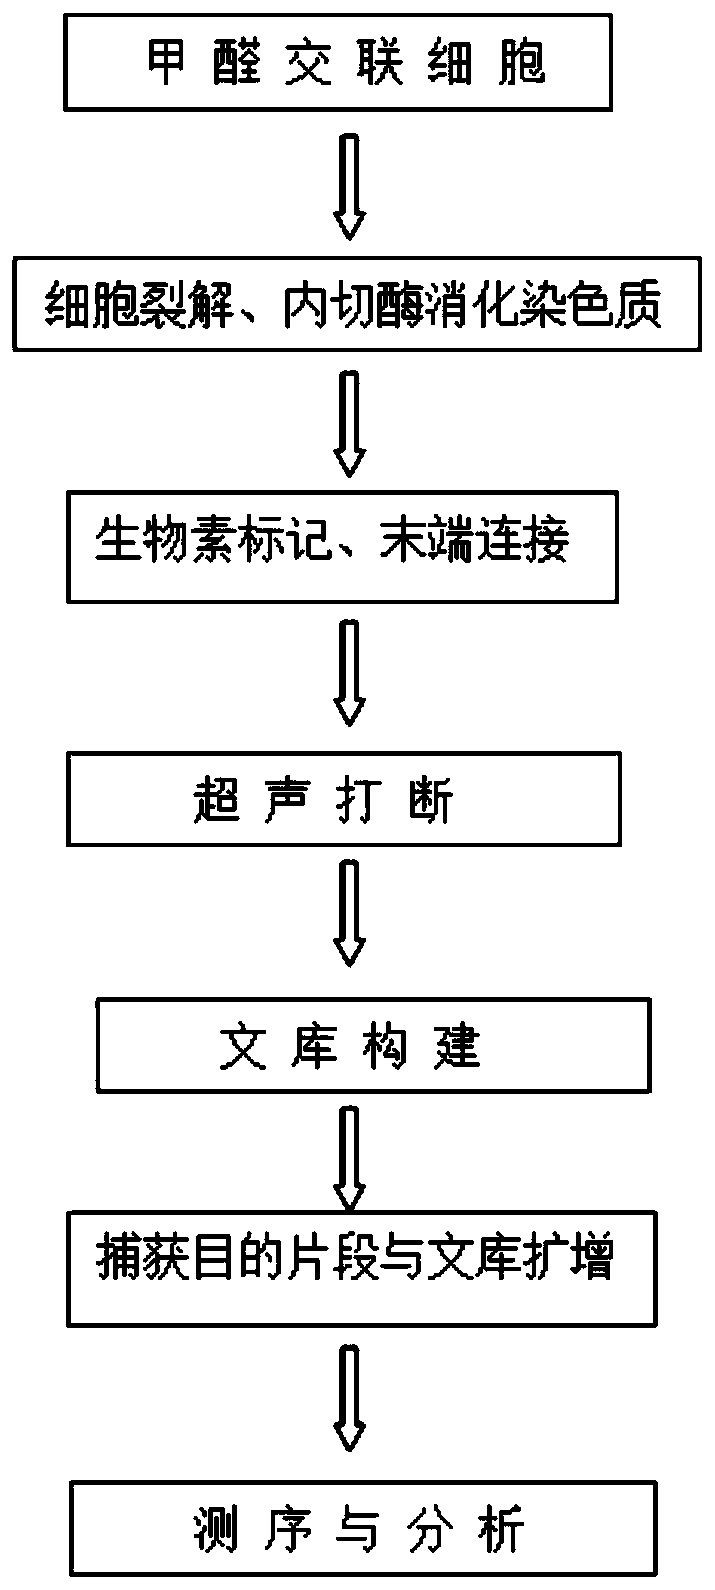 Hi-C high-throughput sequencing library building method suitable for watermifoil